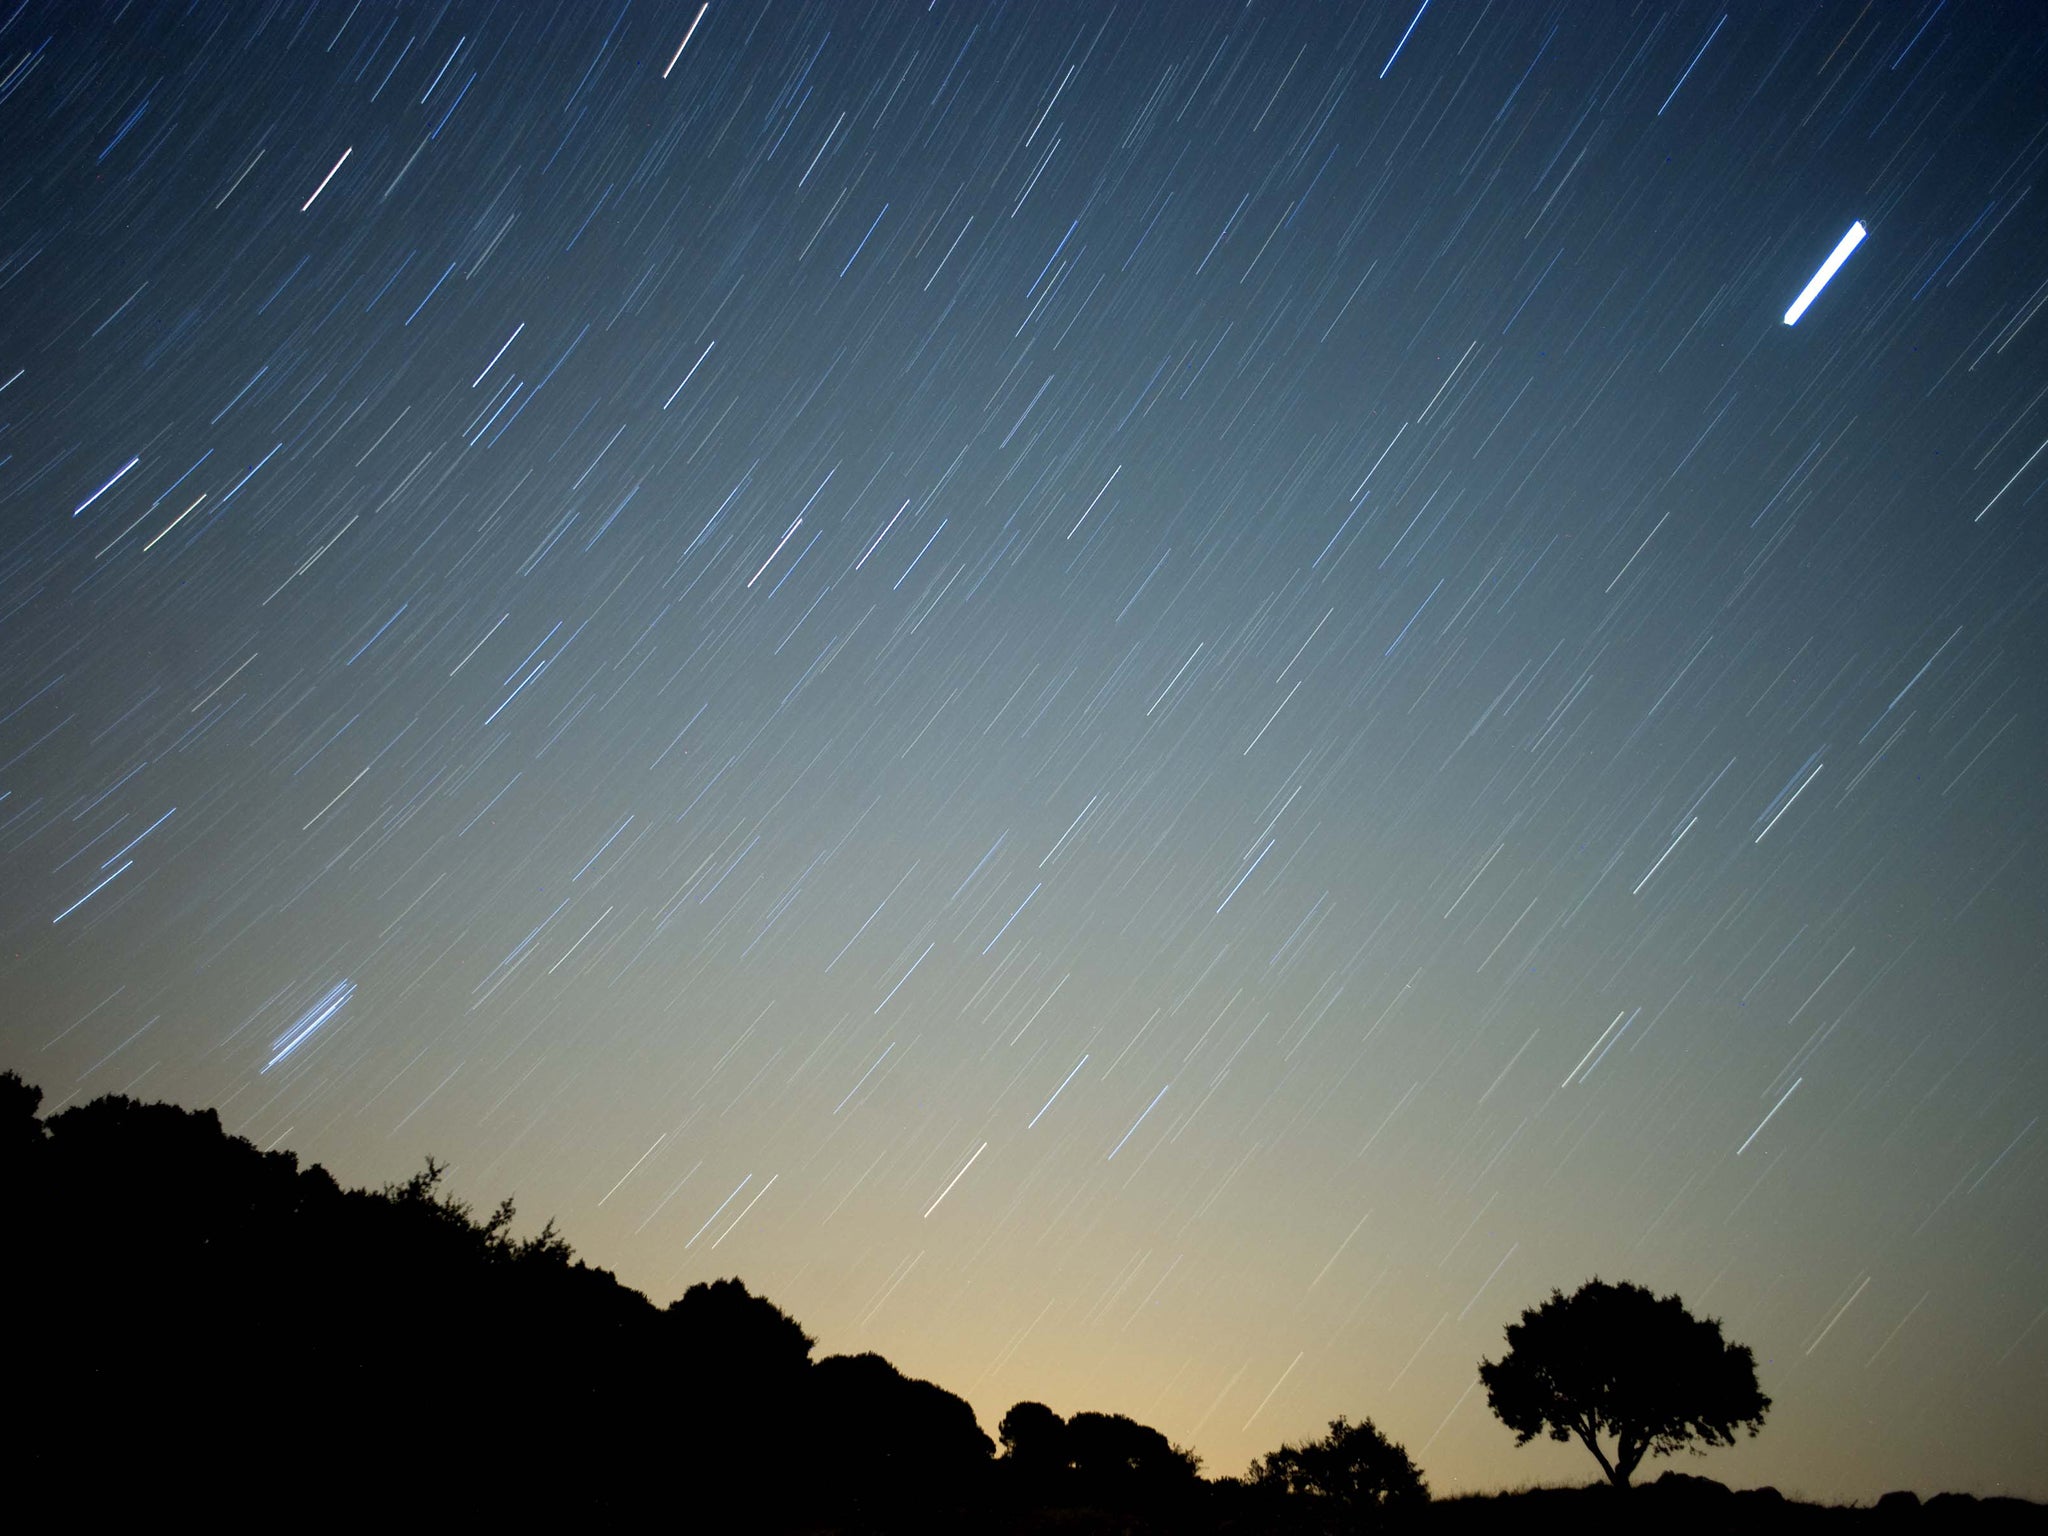 A meteor streaks across the sky against a field of stars during a meteorite shower early August 13, 2010 near Grazalema, southern Spain